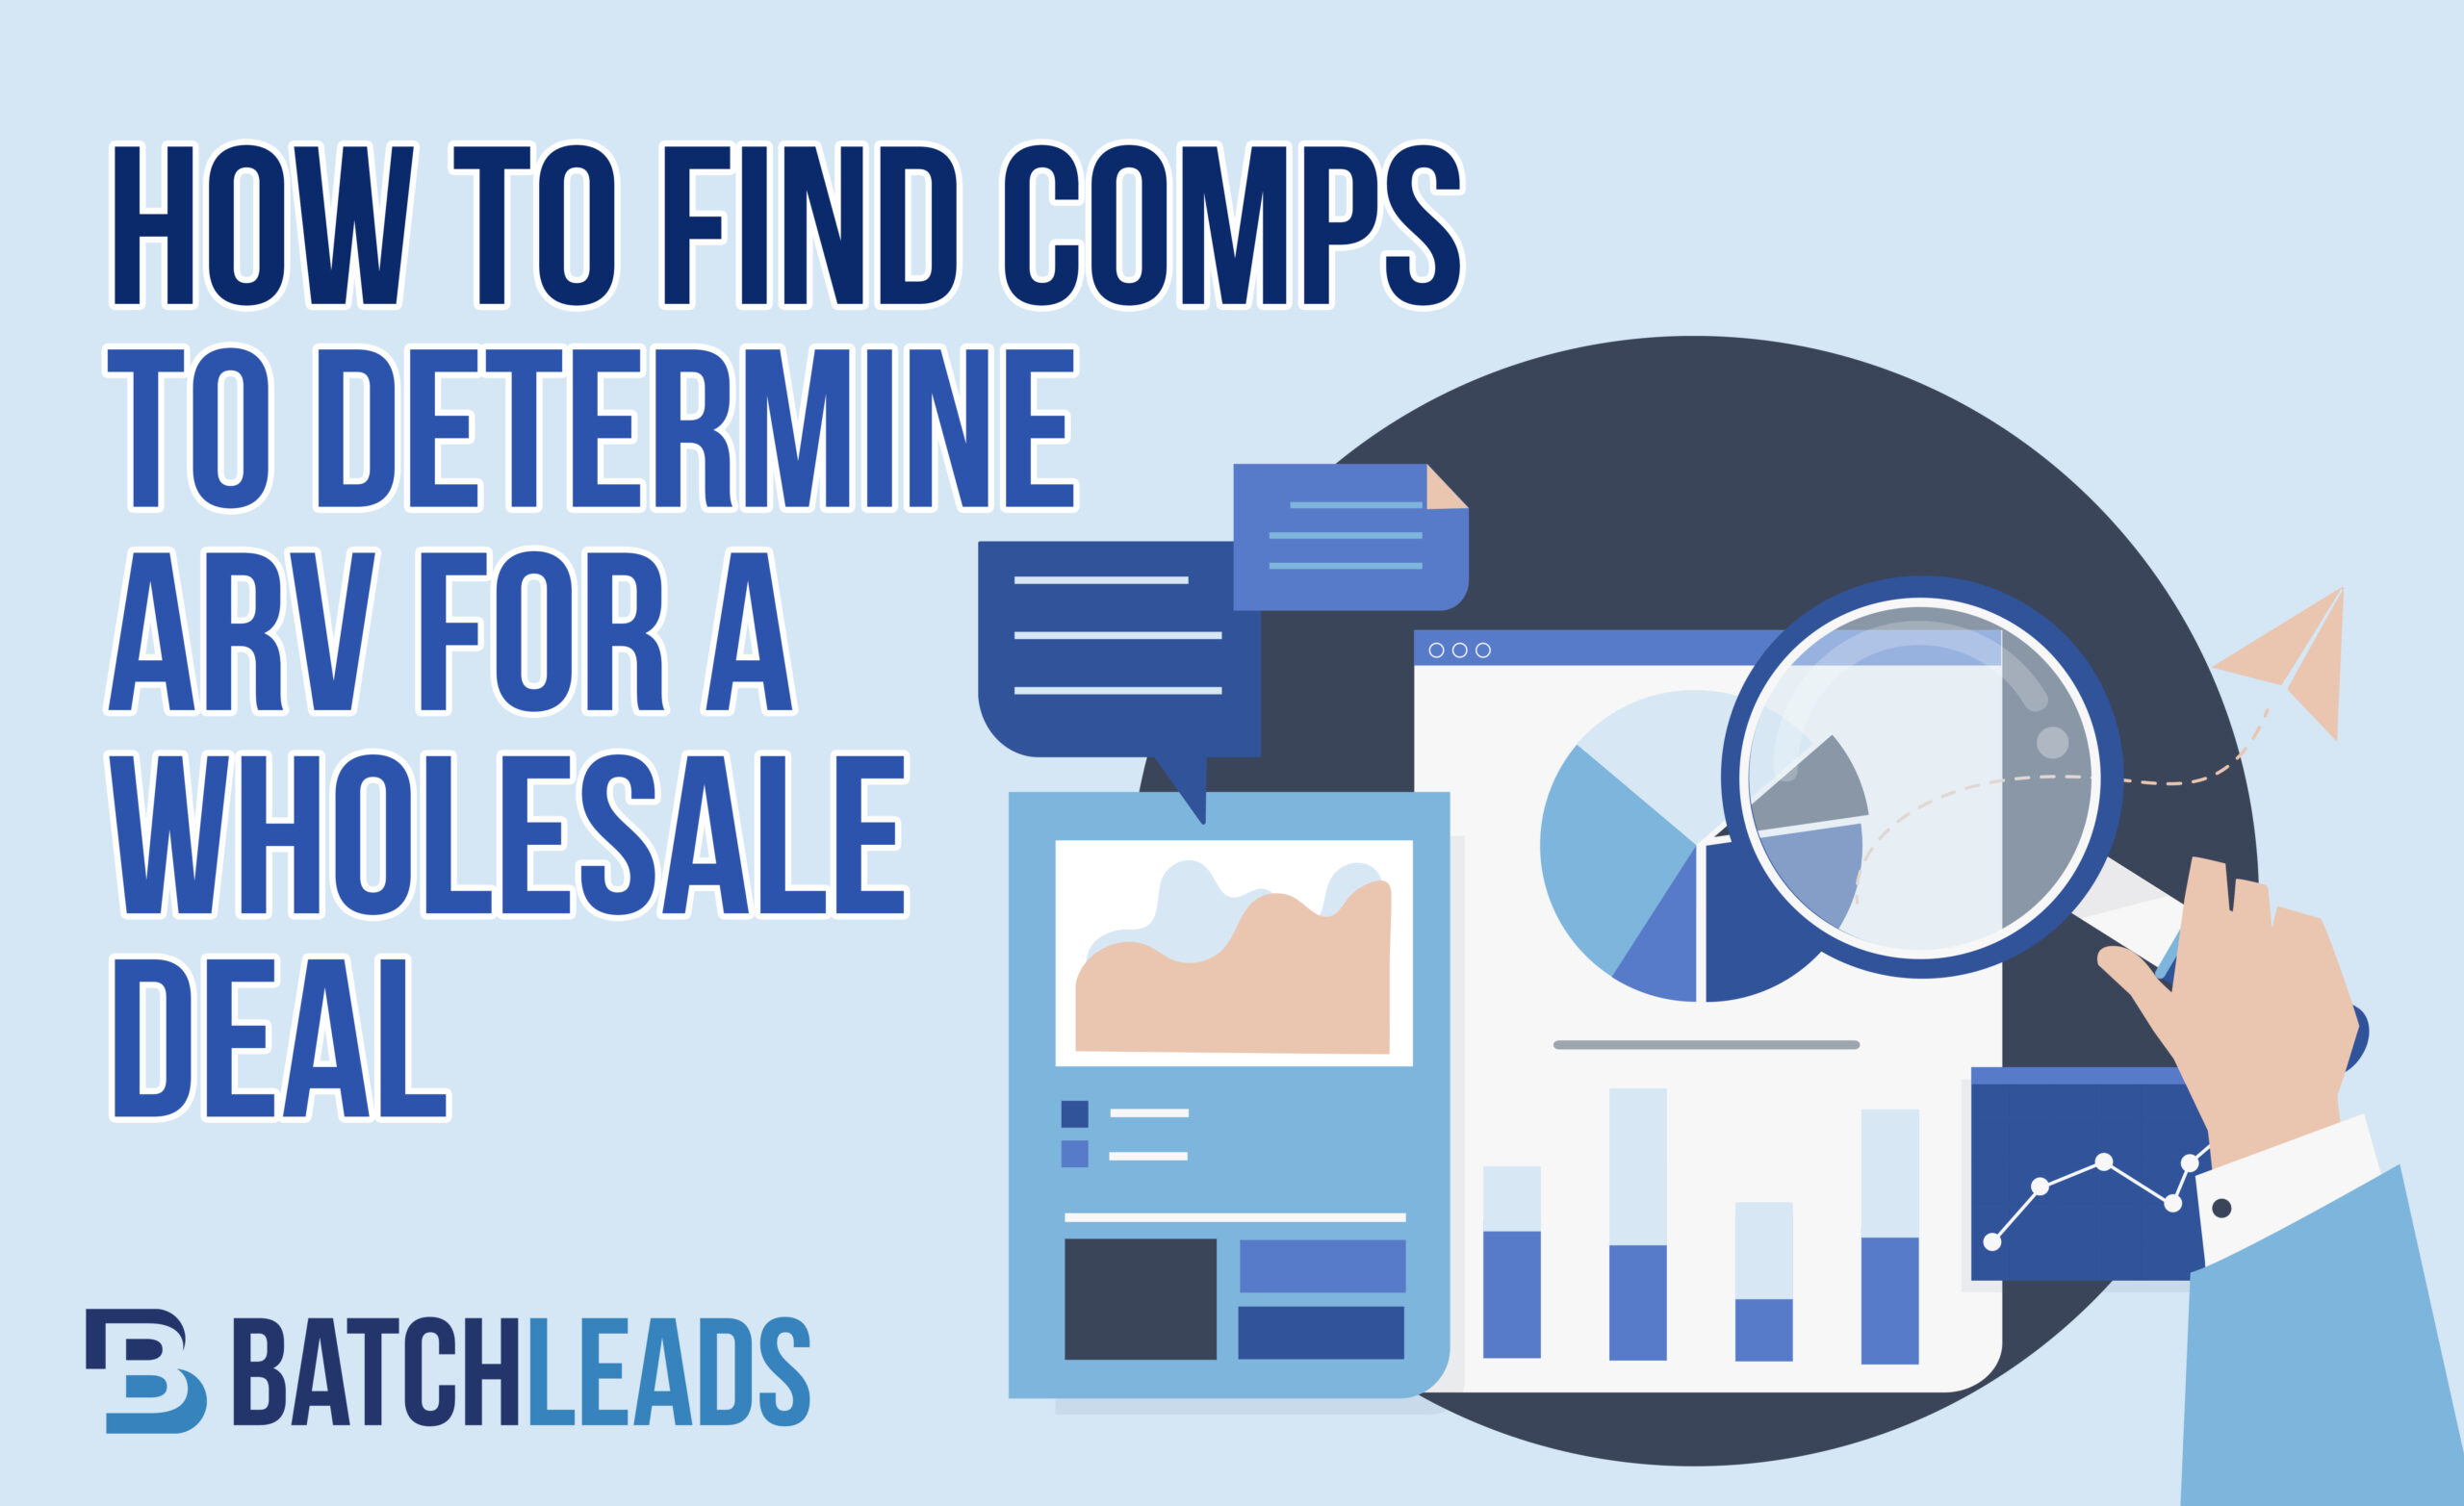 HOW TO FIND COMPS TO DETERMINE ARV FOR A WHOLESALE DEAL